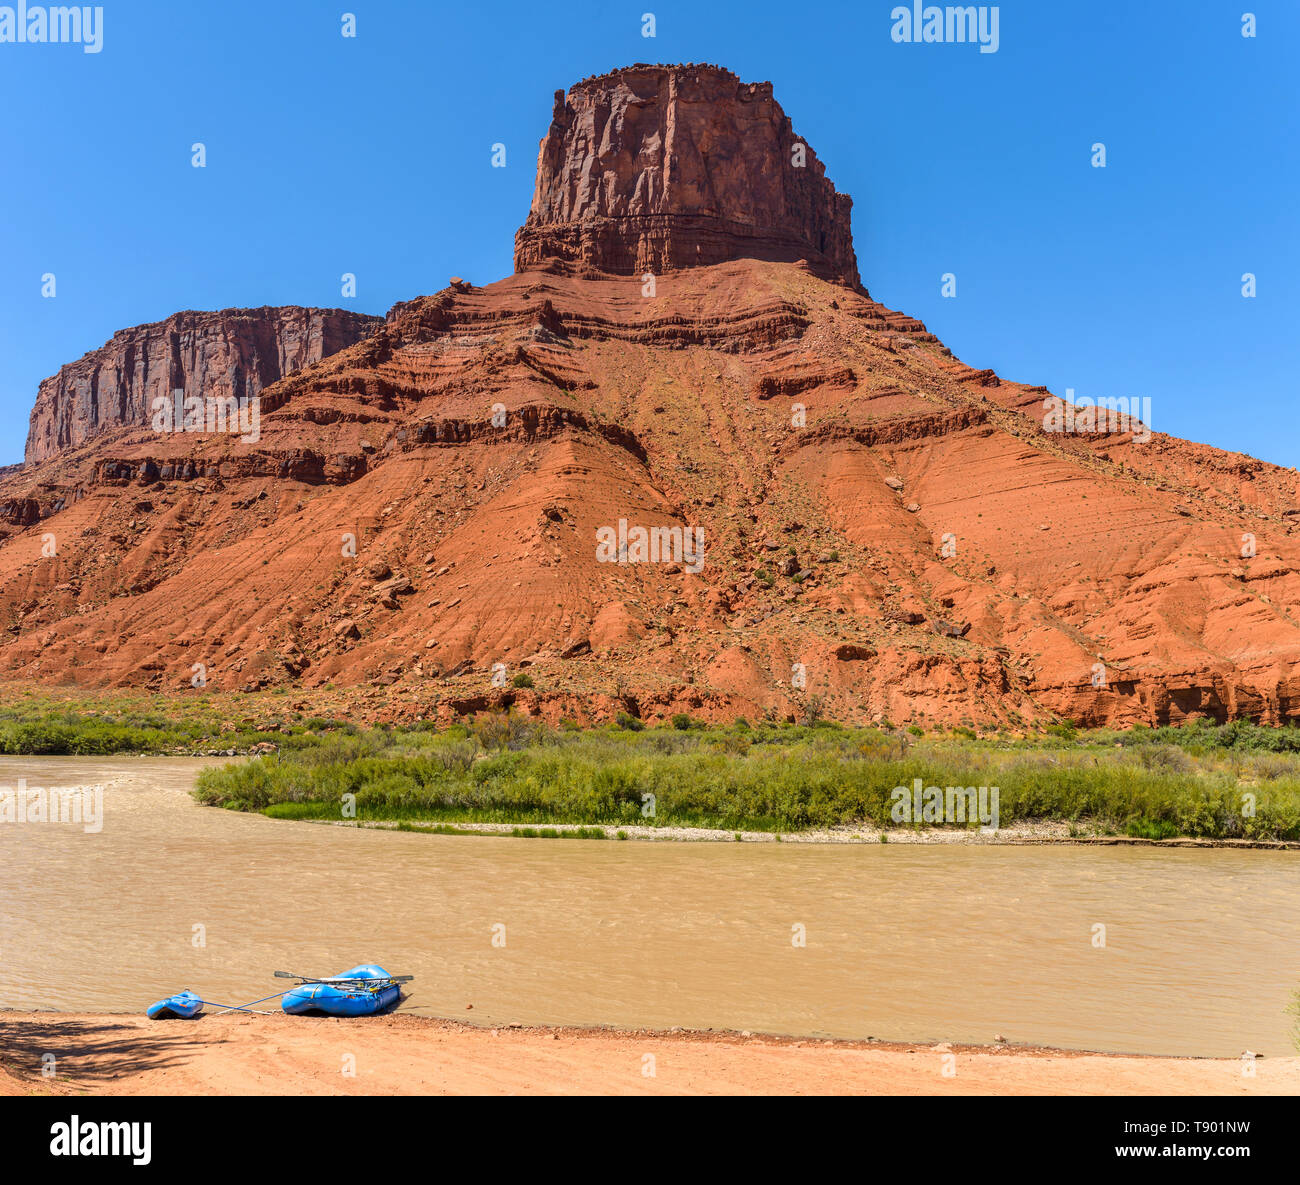 Colorado River in Red Castle Valley - Colorado River running at base of a big red sandstone butte in Castle Valley at Utah and Colorado border, USA. Stock Photo